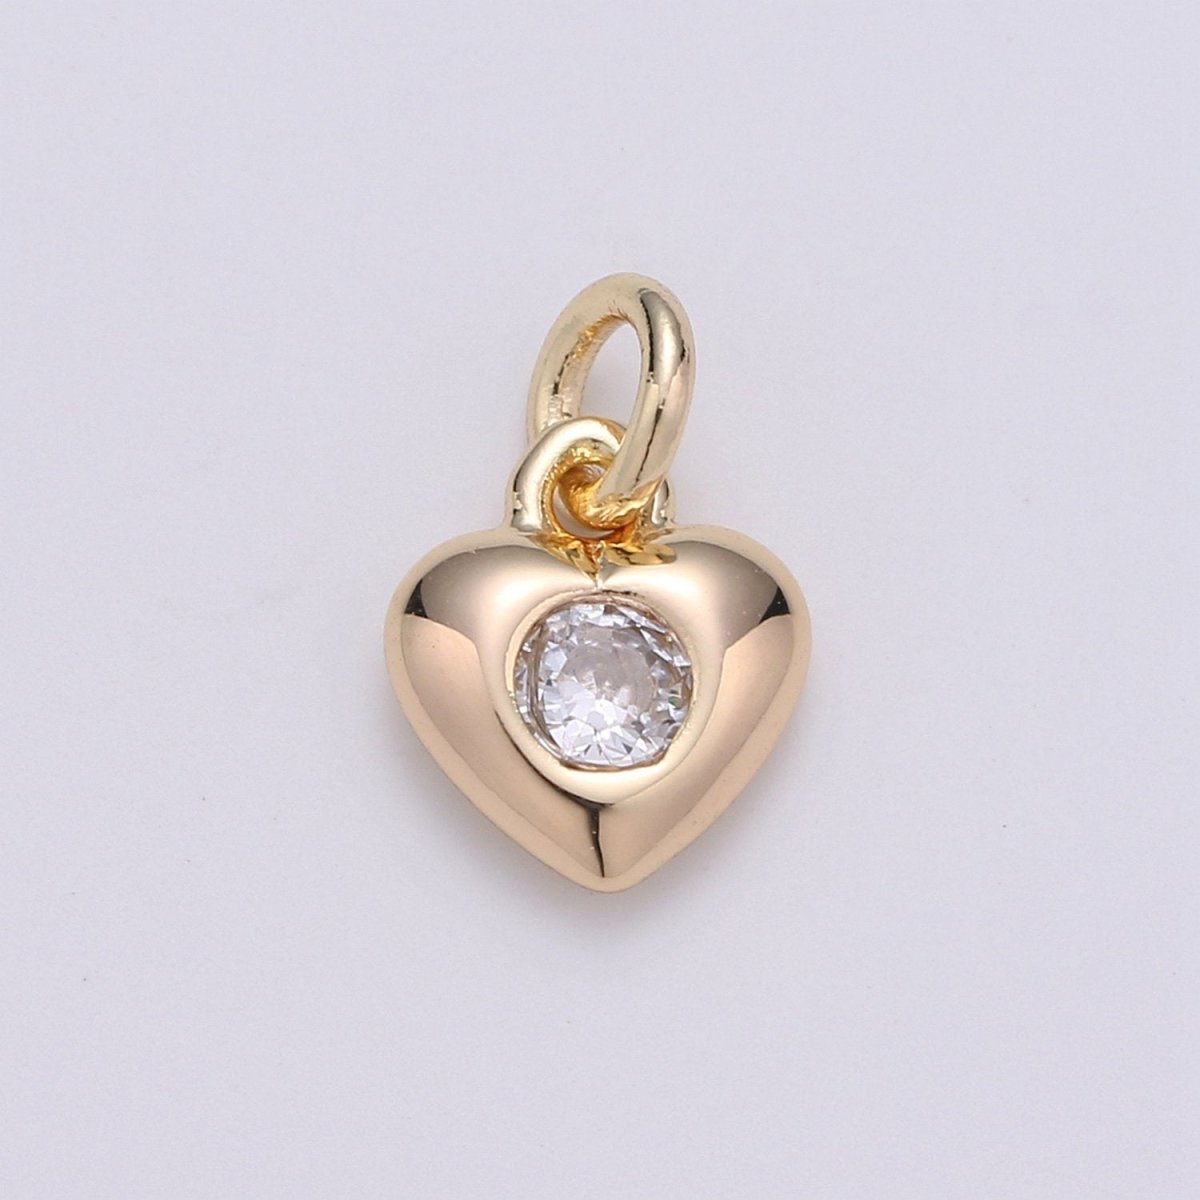 Mini Gold Heart Charm Tiny CZ Charm - Gold Love Charm with cubic zirconia for Bracelet, Necklace Earring Relationship Jewelry D-393 - DLUXCA